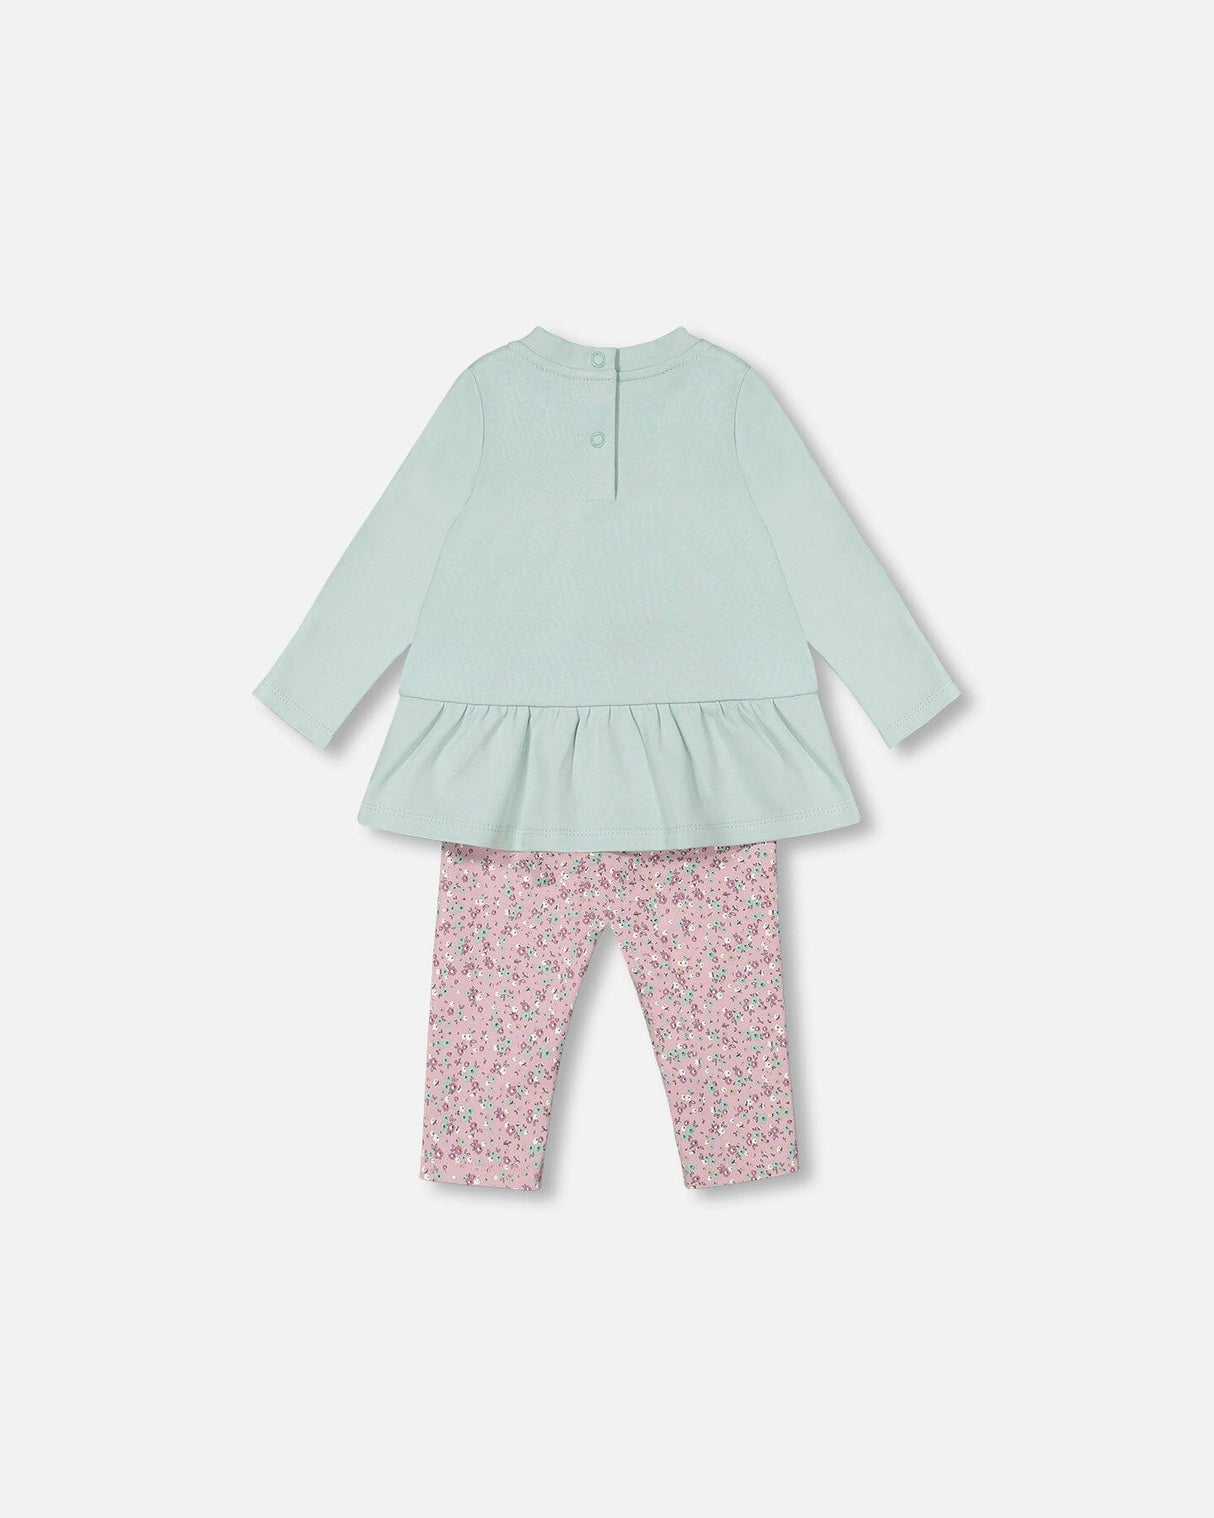 Organic Cotton Tunic And Printed Legging Set Mint And Mauve Little Flower Print-3